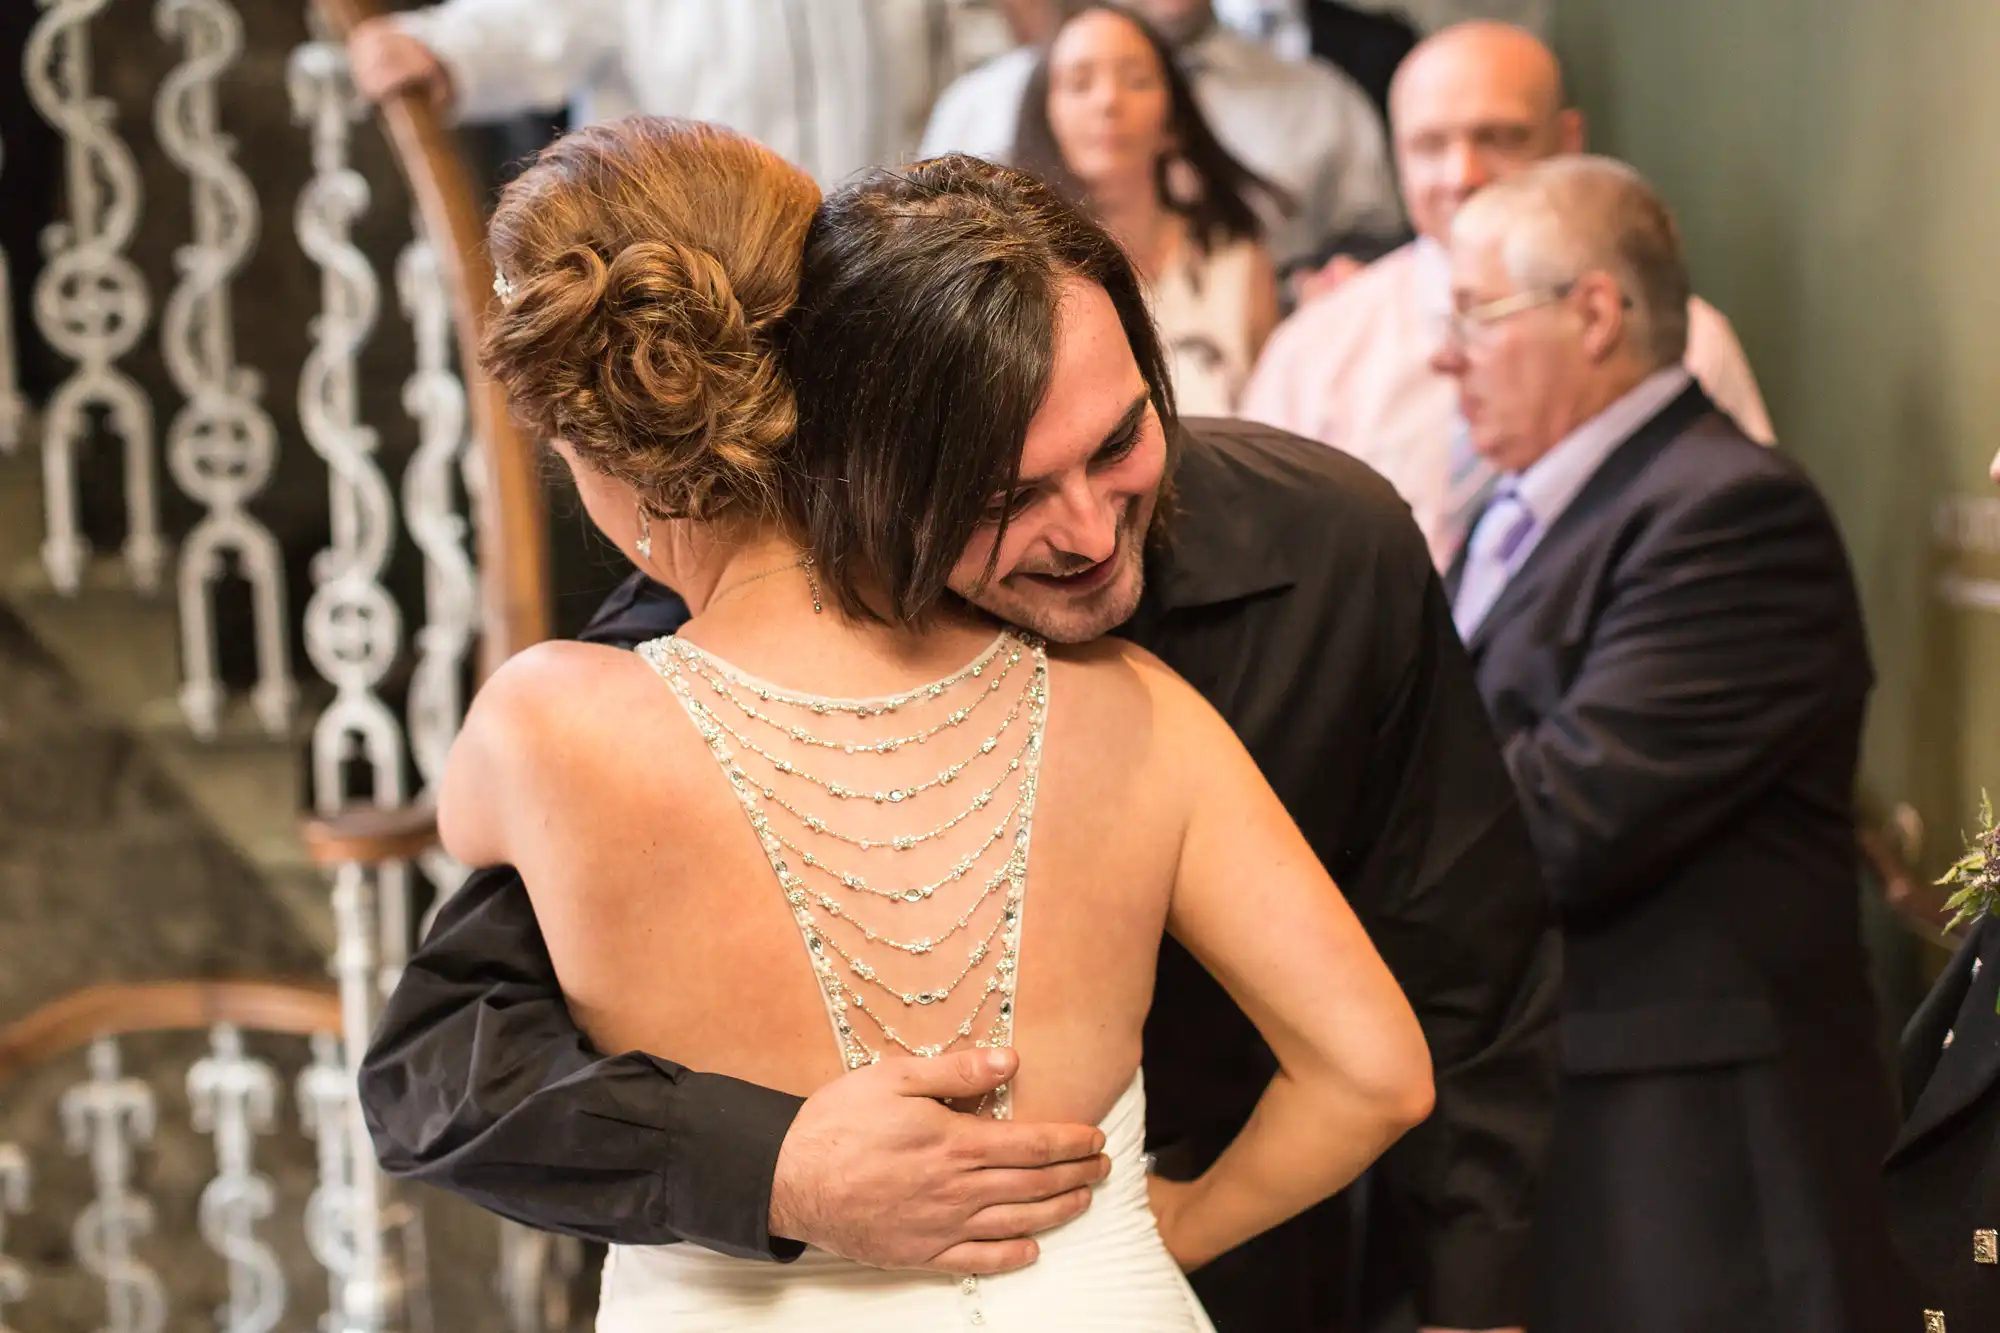 Bride in a white dress and groom embracing at their wedding ceremony, both smiling with guests in the background.